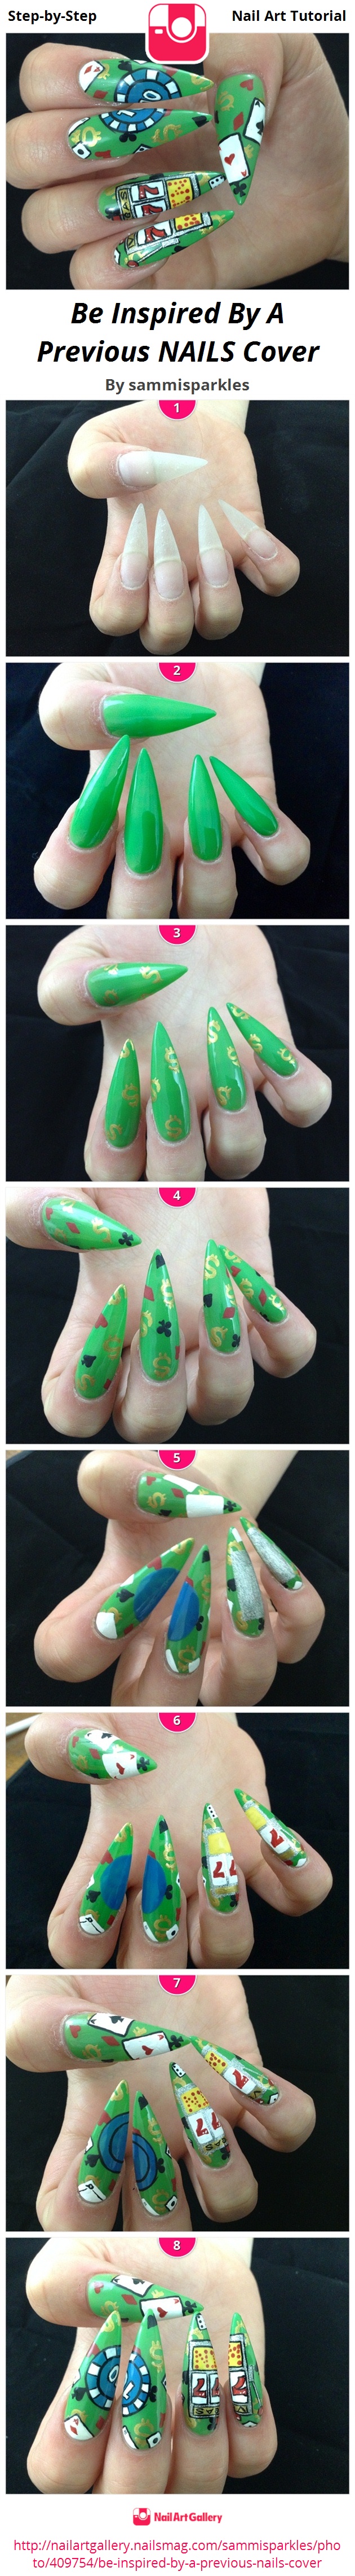 Be Inspired By A Previous NAILS Cover - Nail Art Gallery